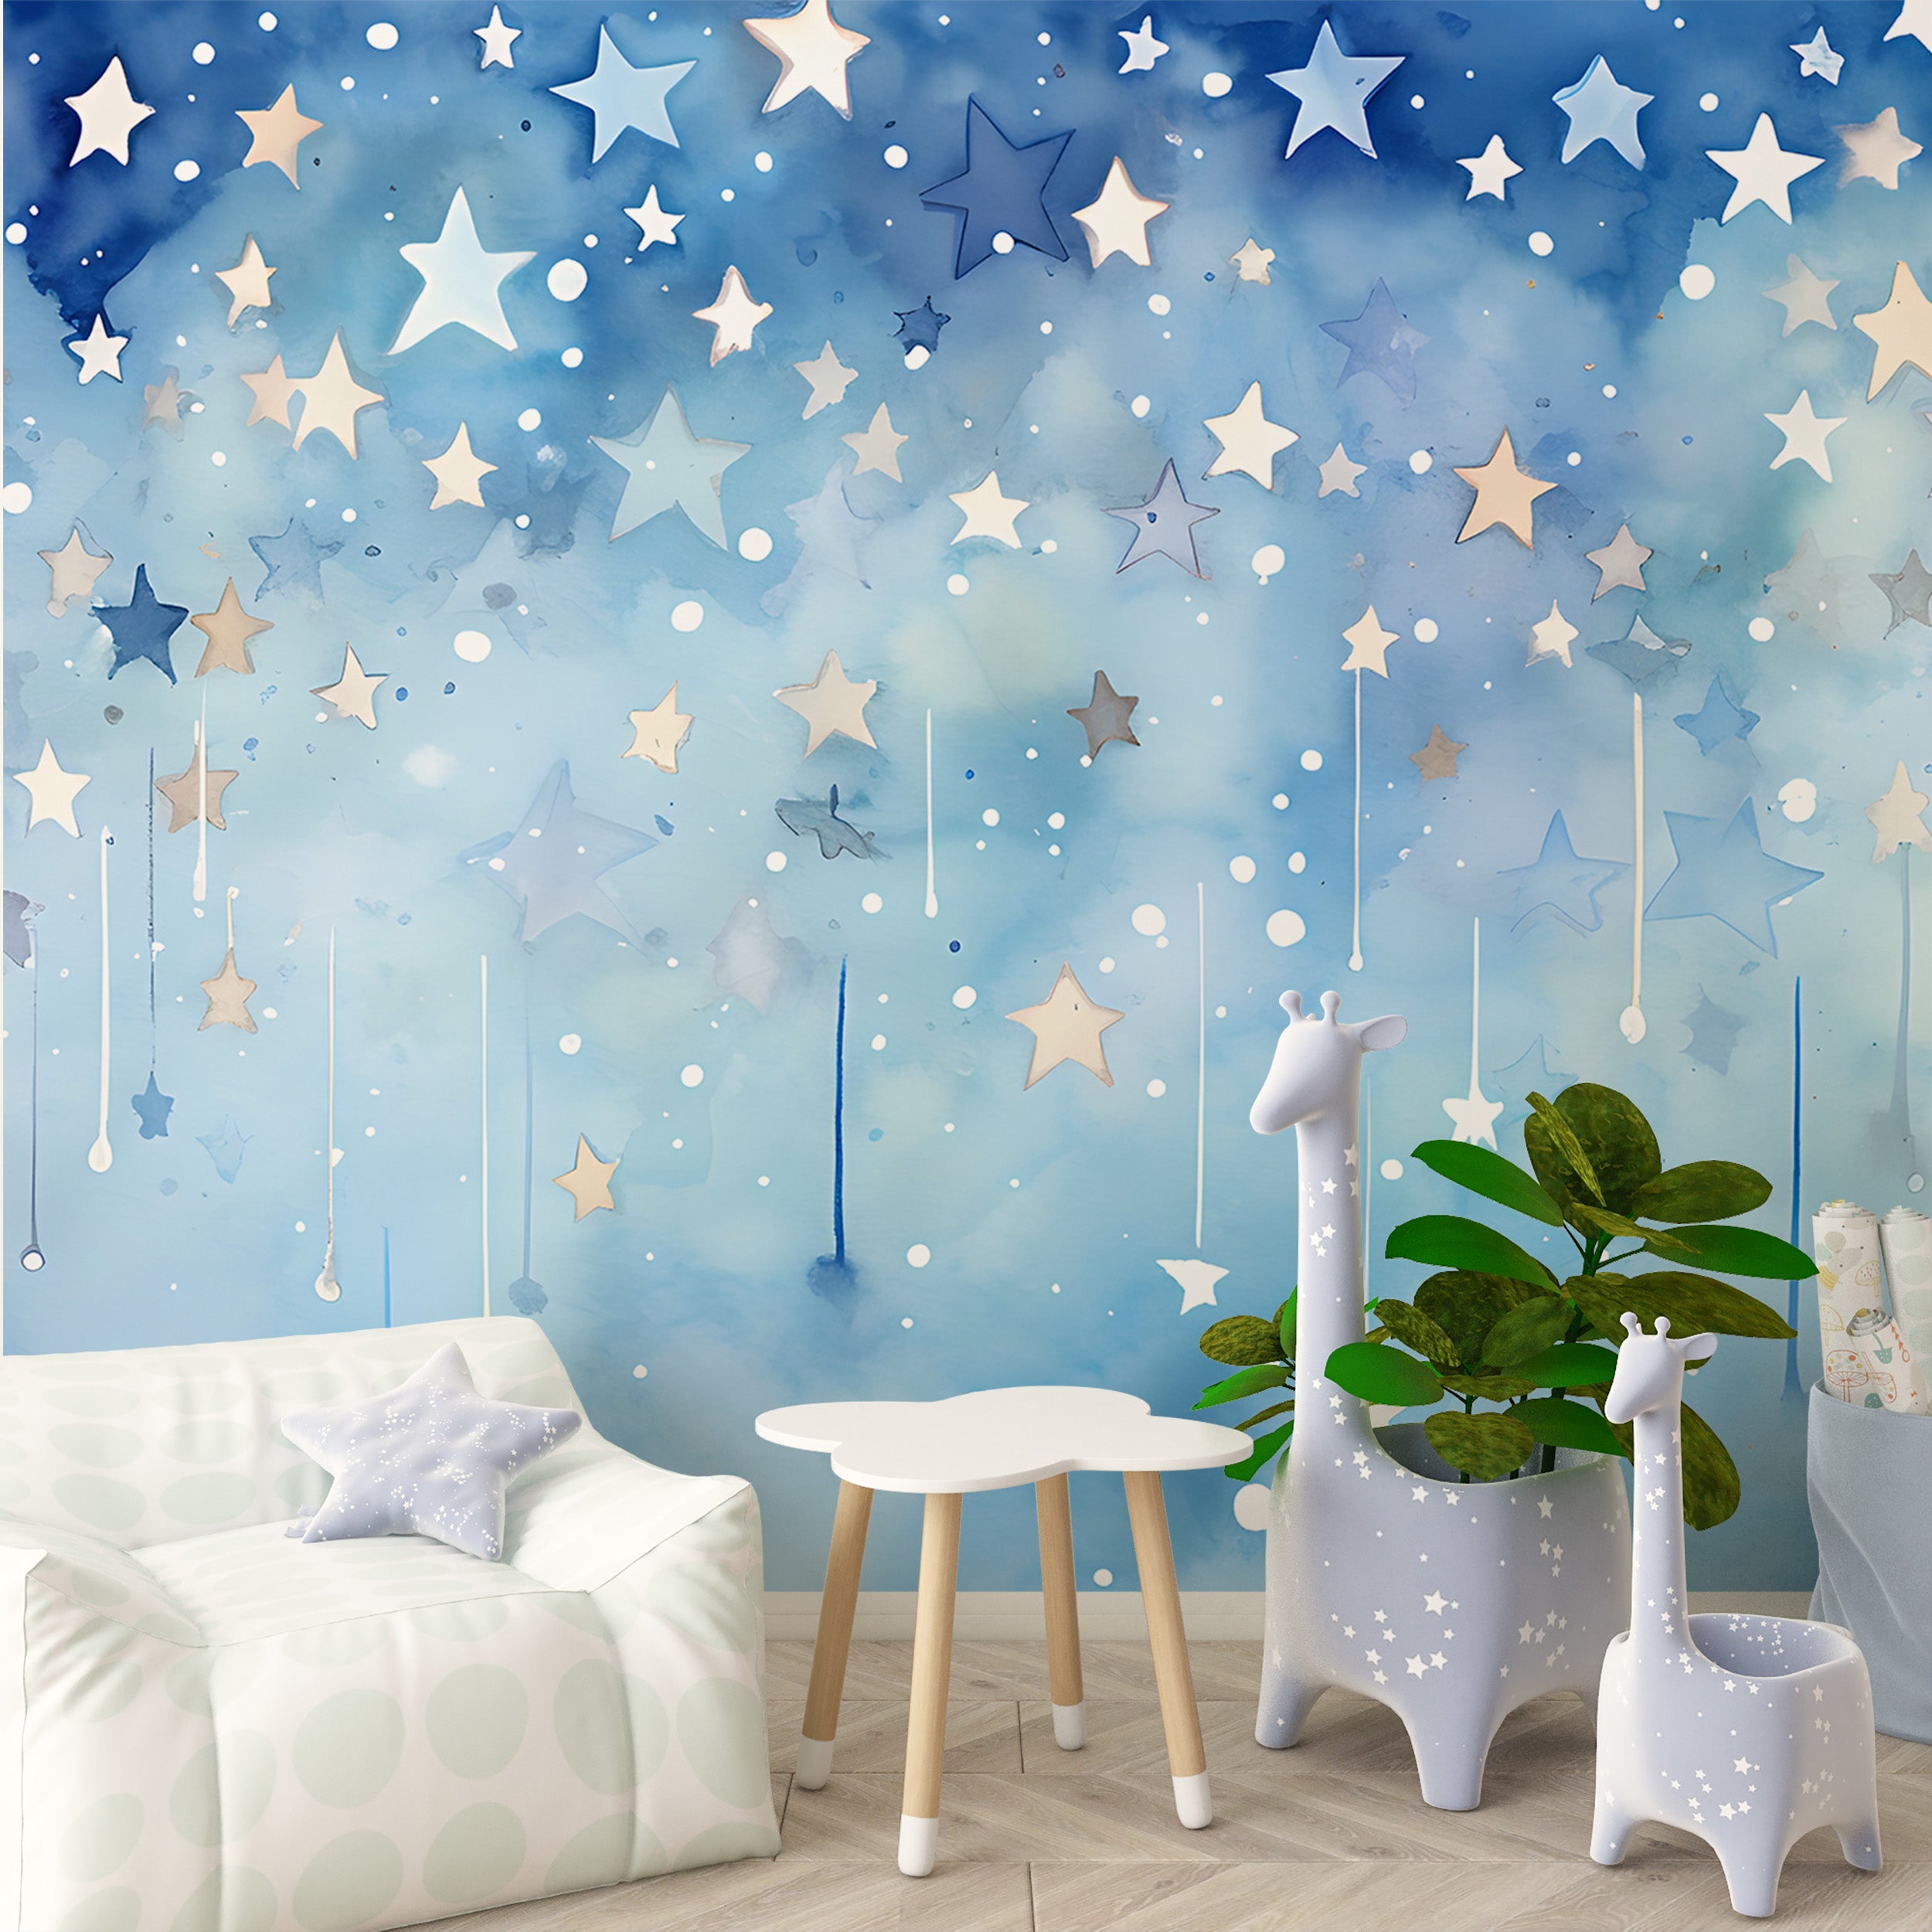 Peel and Stick Starry Sky Wall Decal